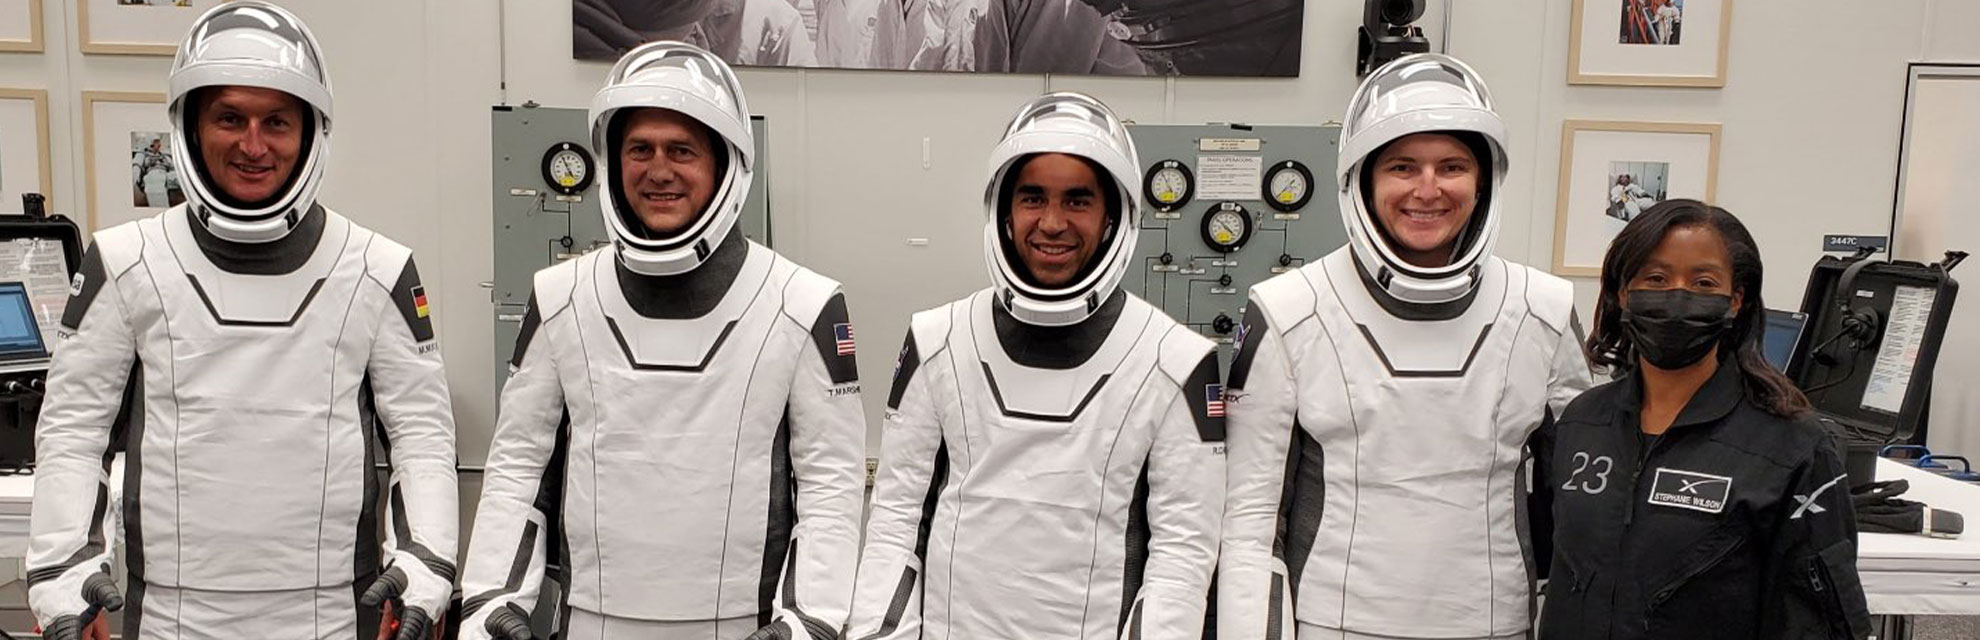 Indian American NASA astronaut, Raja Chari shared a photo taken just before his team’s lauch to the International Space Station. “This was the last photo I had on my phone a year ago getting suited up @NASAKennedy before we went out to the launch pad for our trip to the @Space_Station,” he captioned it.